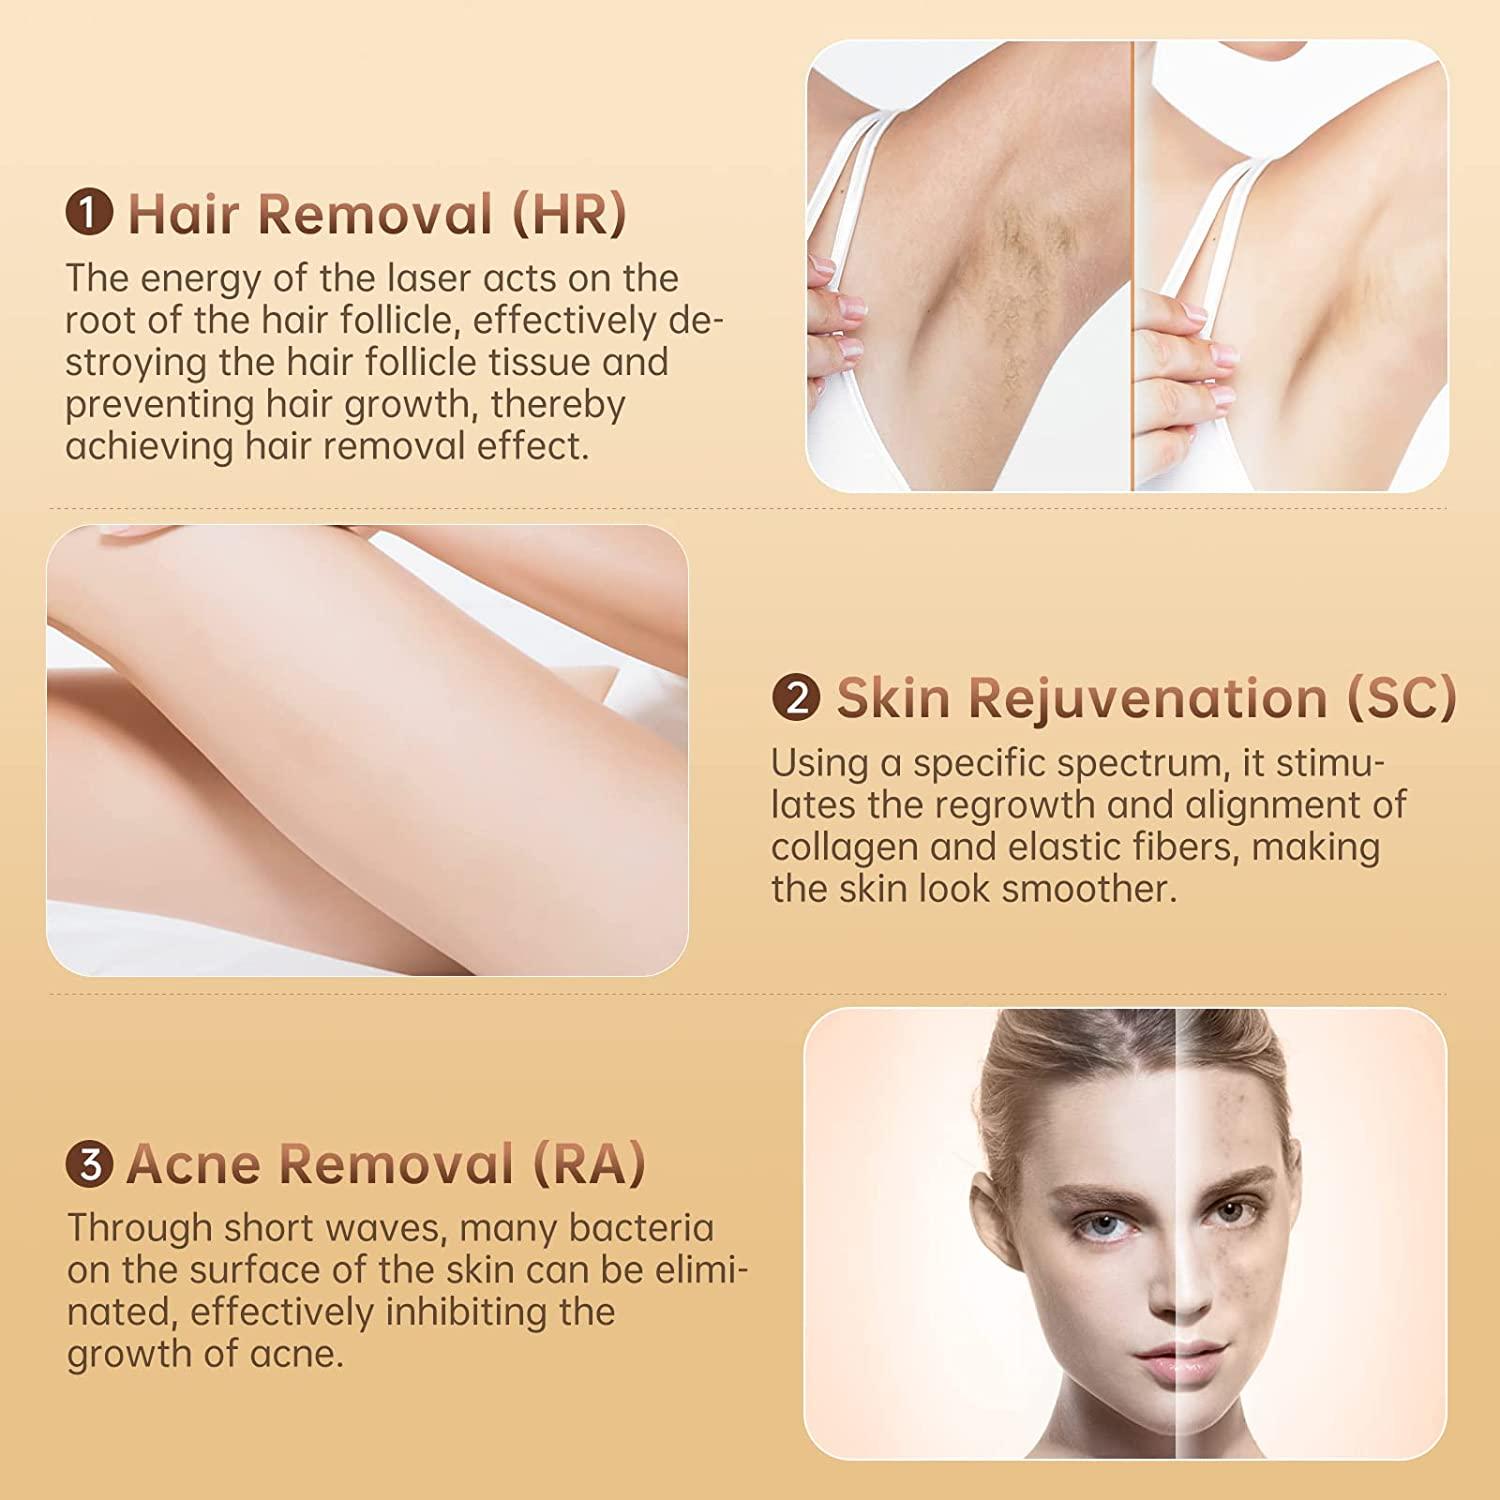 Laser Hair Removal for Women and Men, Upgraded 999,900+ Flashes Permanent  Painless At-Home Hair Removal Device for Armpits,Legs and Whole Body Use